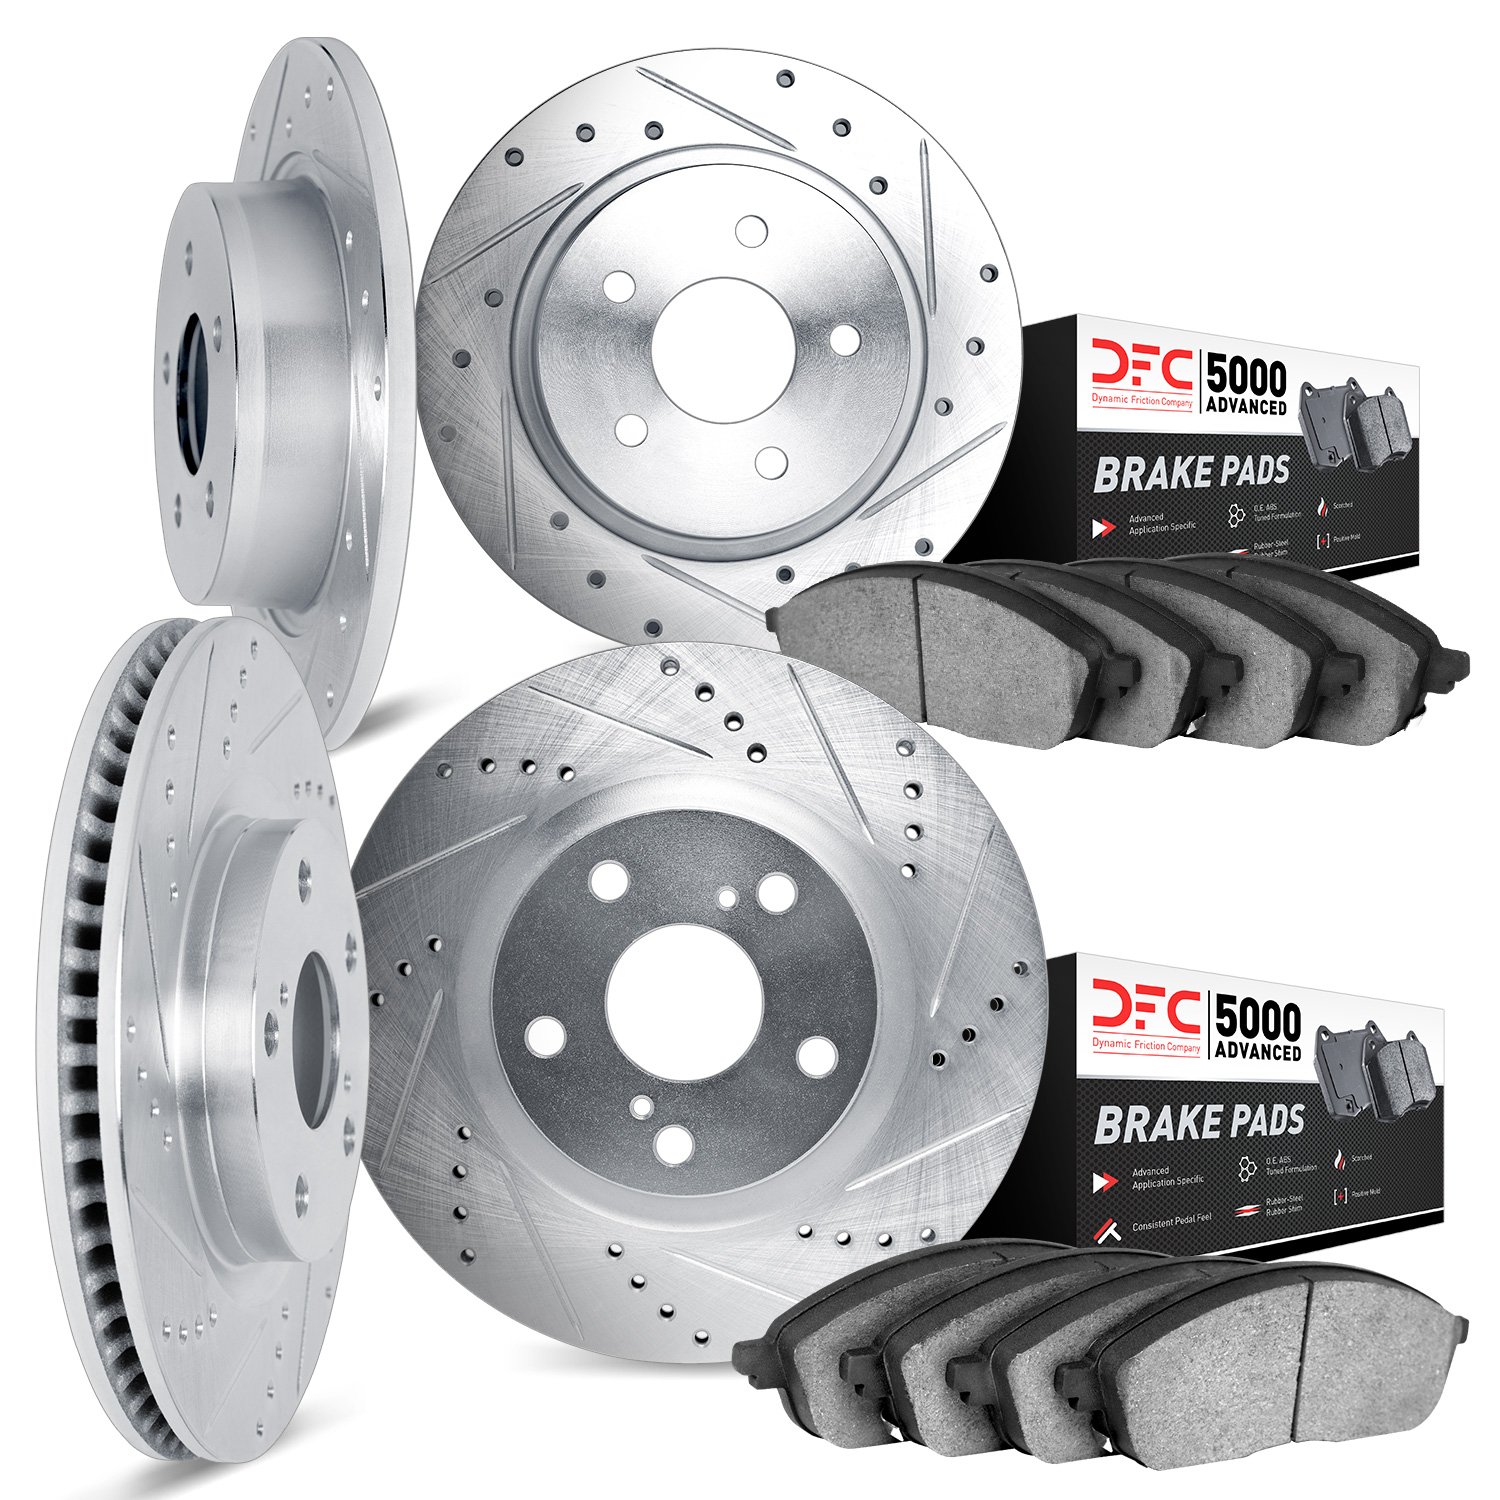 7504-74060 Drilled/Slotted Brake Rotors w/5000 Advanced Brake Pads Kit [Silver], 1999-2010 Audi/Volkswagen, Position: Front and